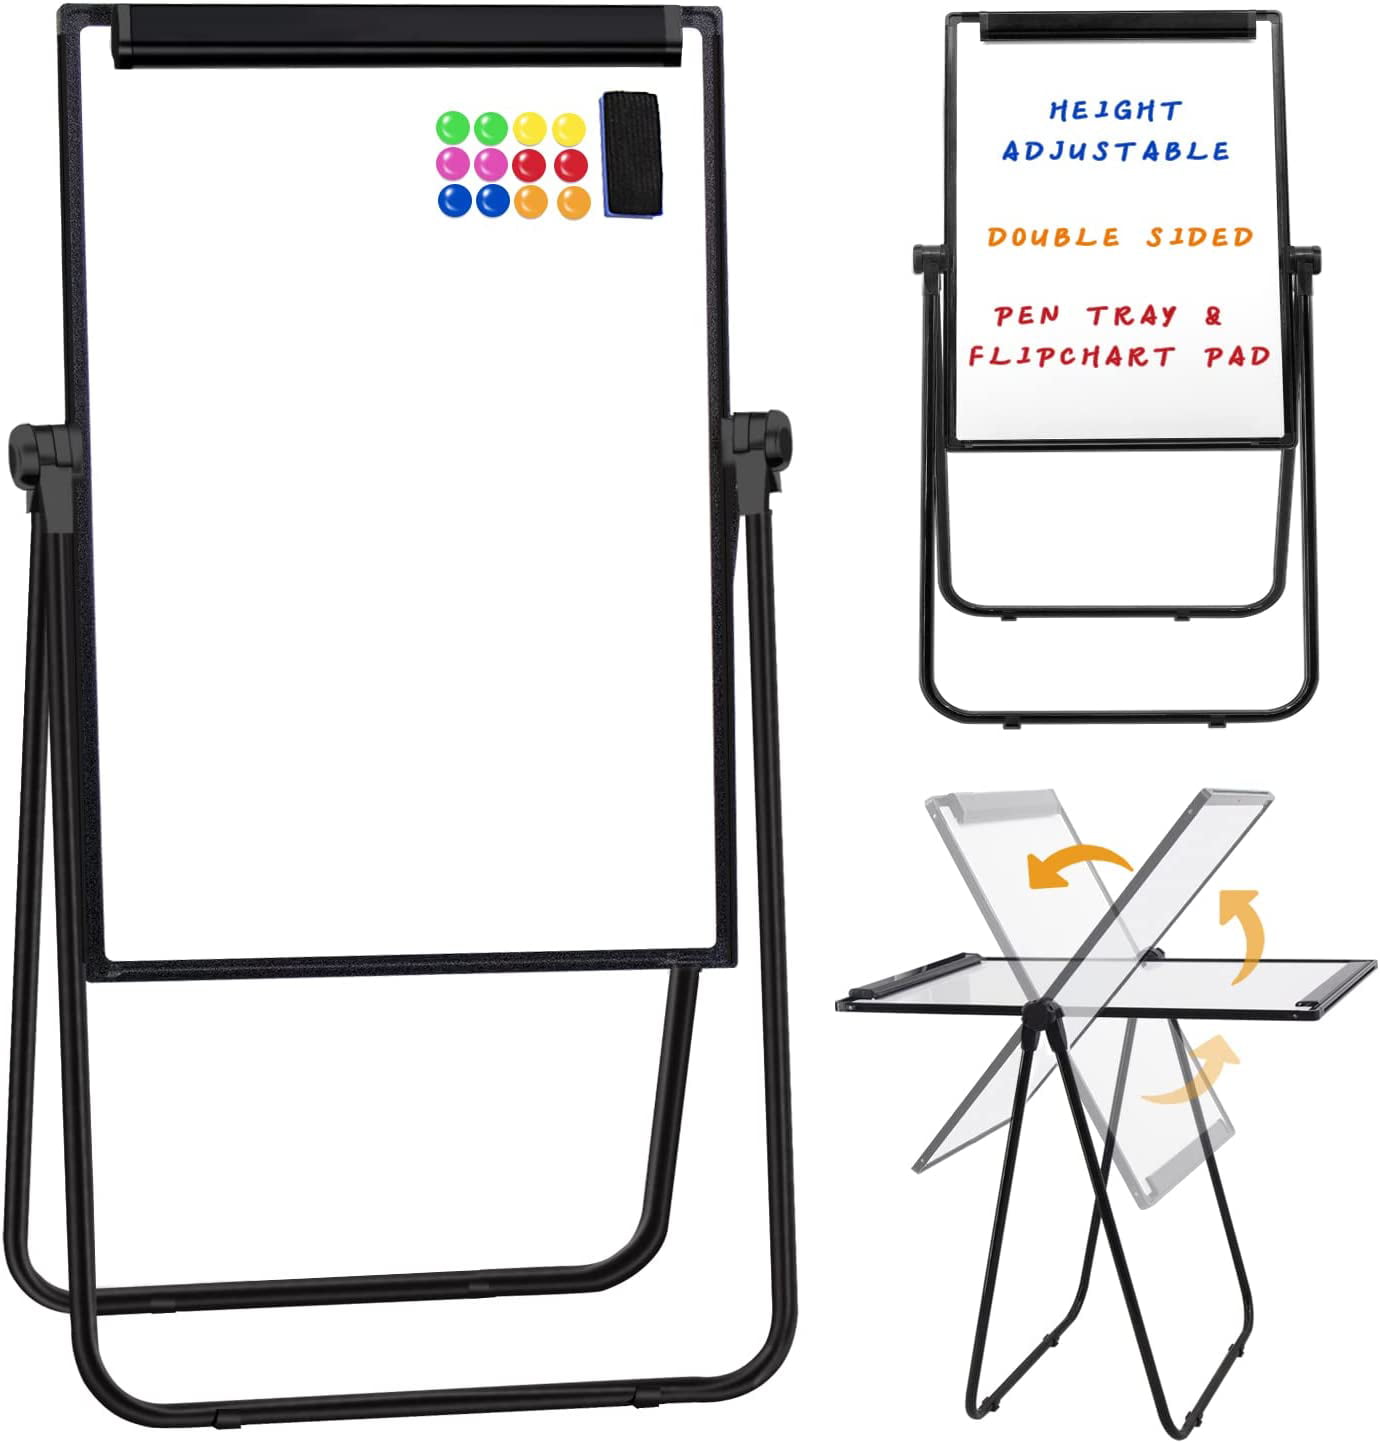 6 Magnets and Paper Pads Height Adjustable & 360 Degree Rotating Board w/ 1 Eraser Flipchart Holder U-Stand Whiteboard Easel- 40x28 inches Double Sided Magnetic Dry Erase Board Easel 